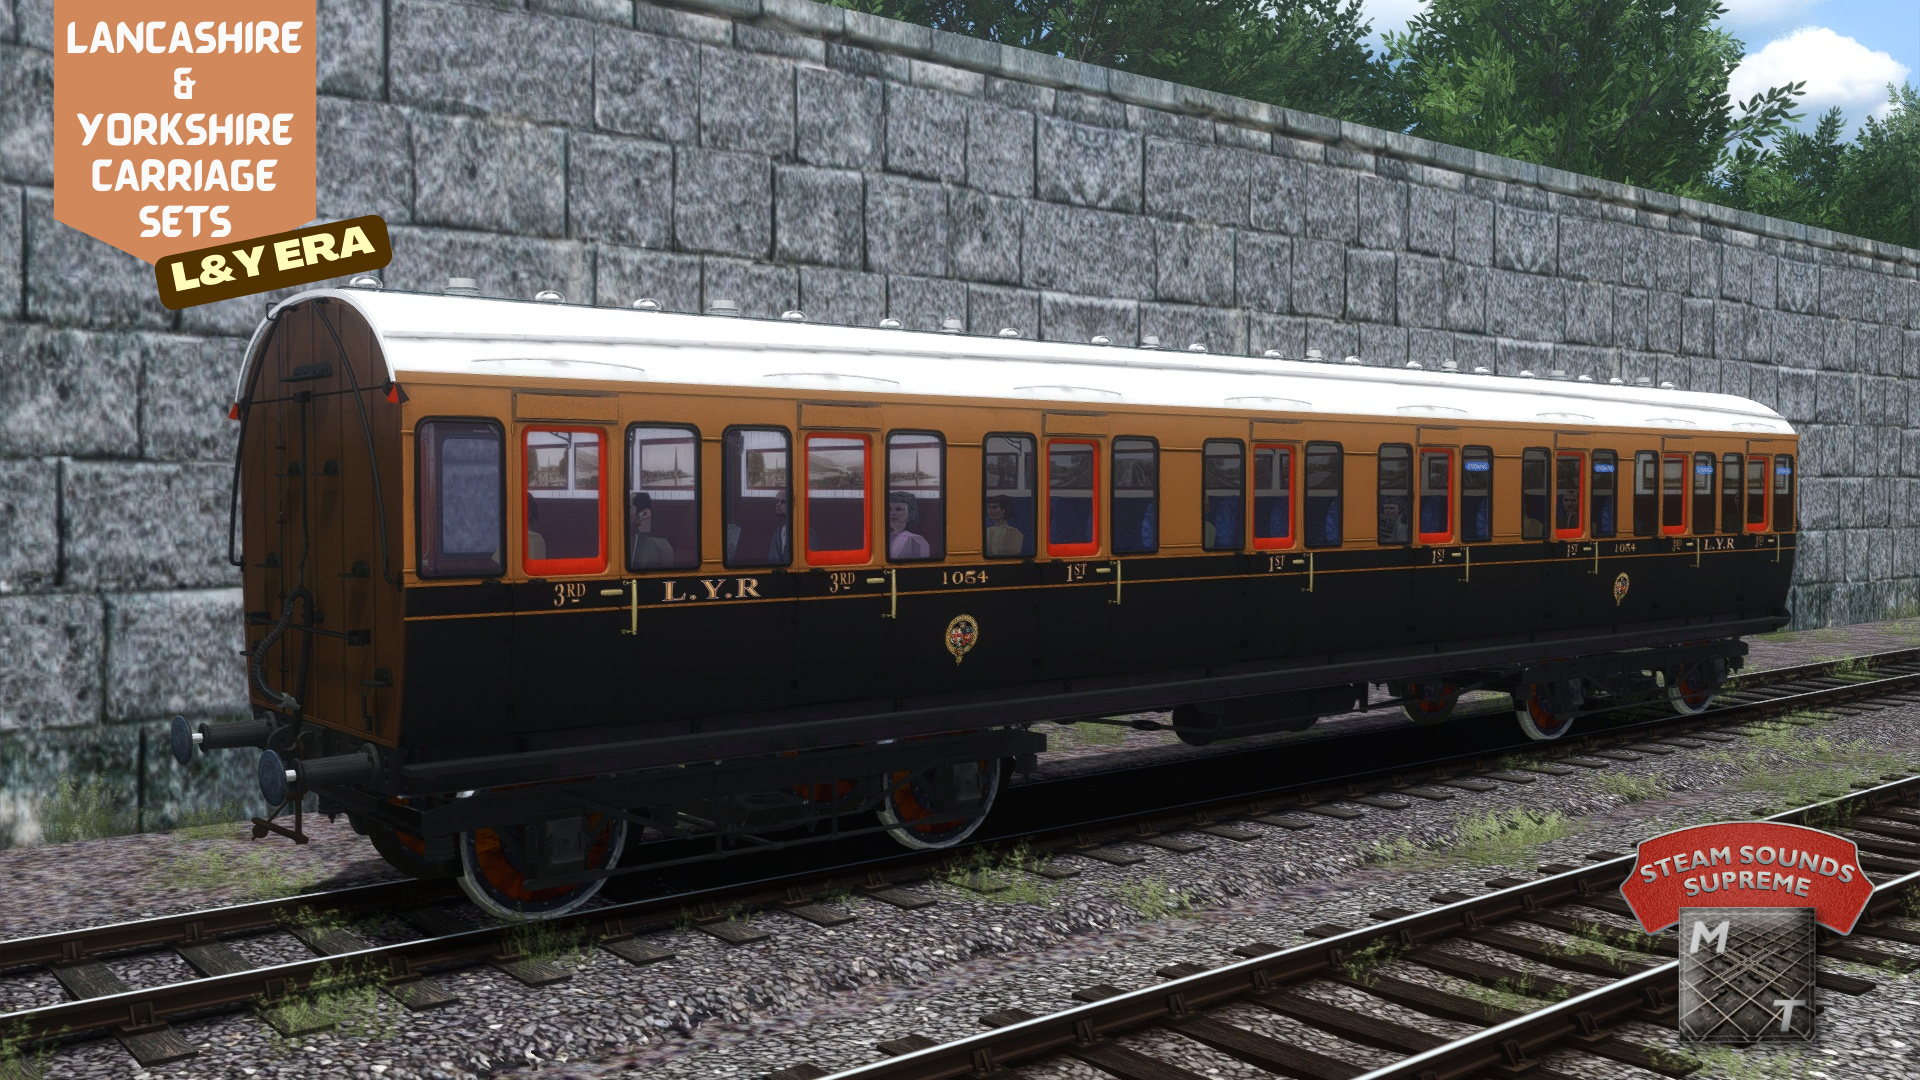 L&Y CARRIAGE SETS 06.png